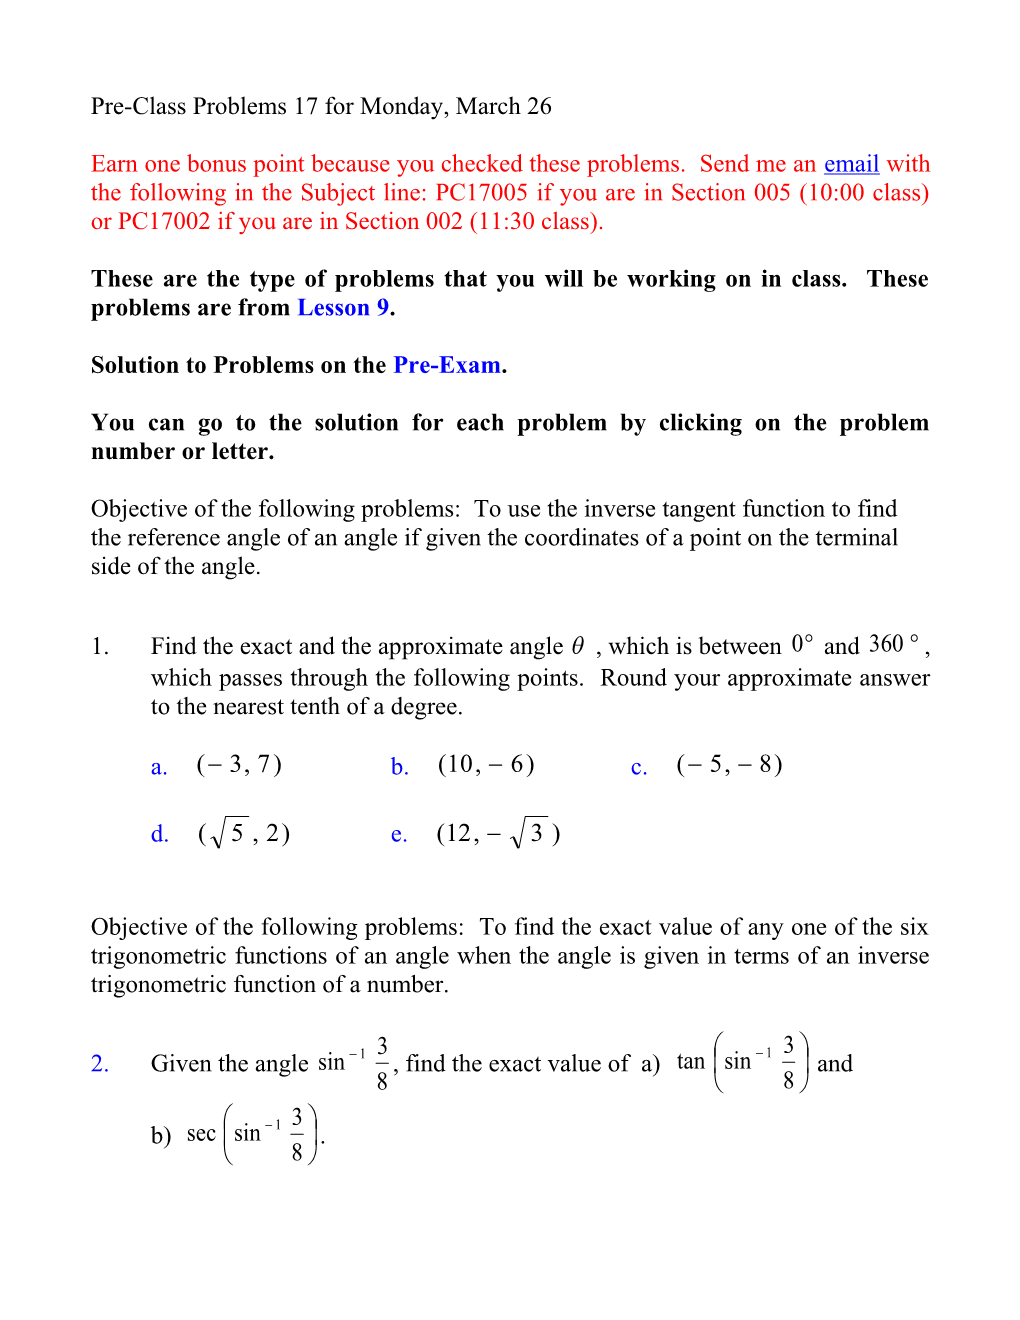 Pre-Class Problems17 for Monday, March 26